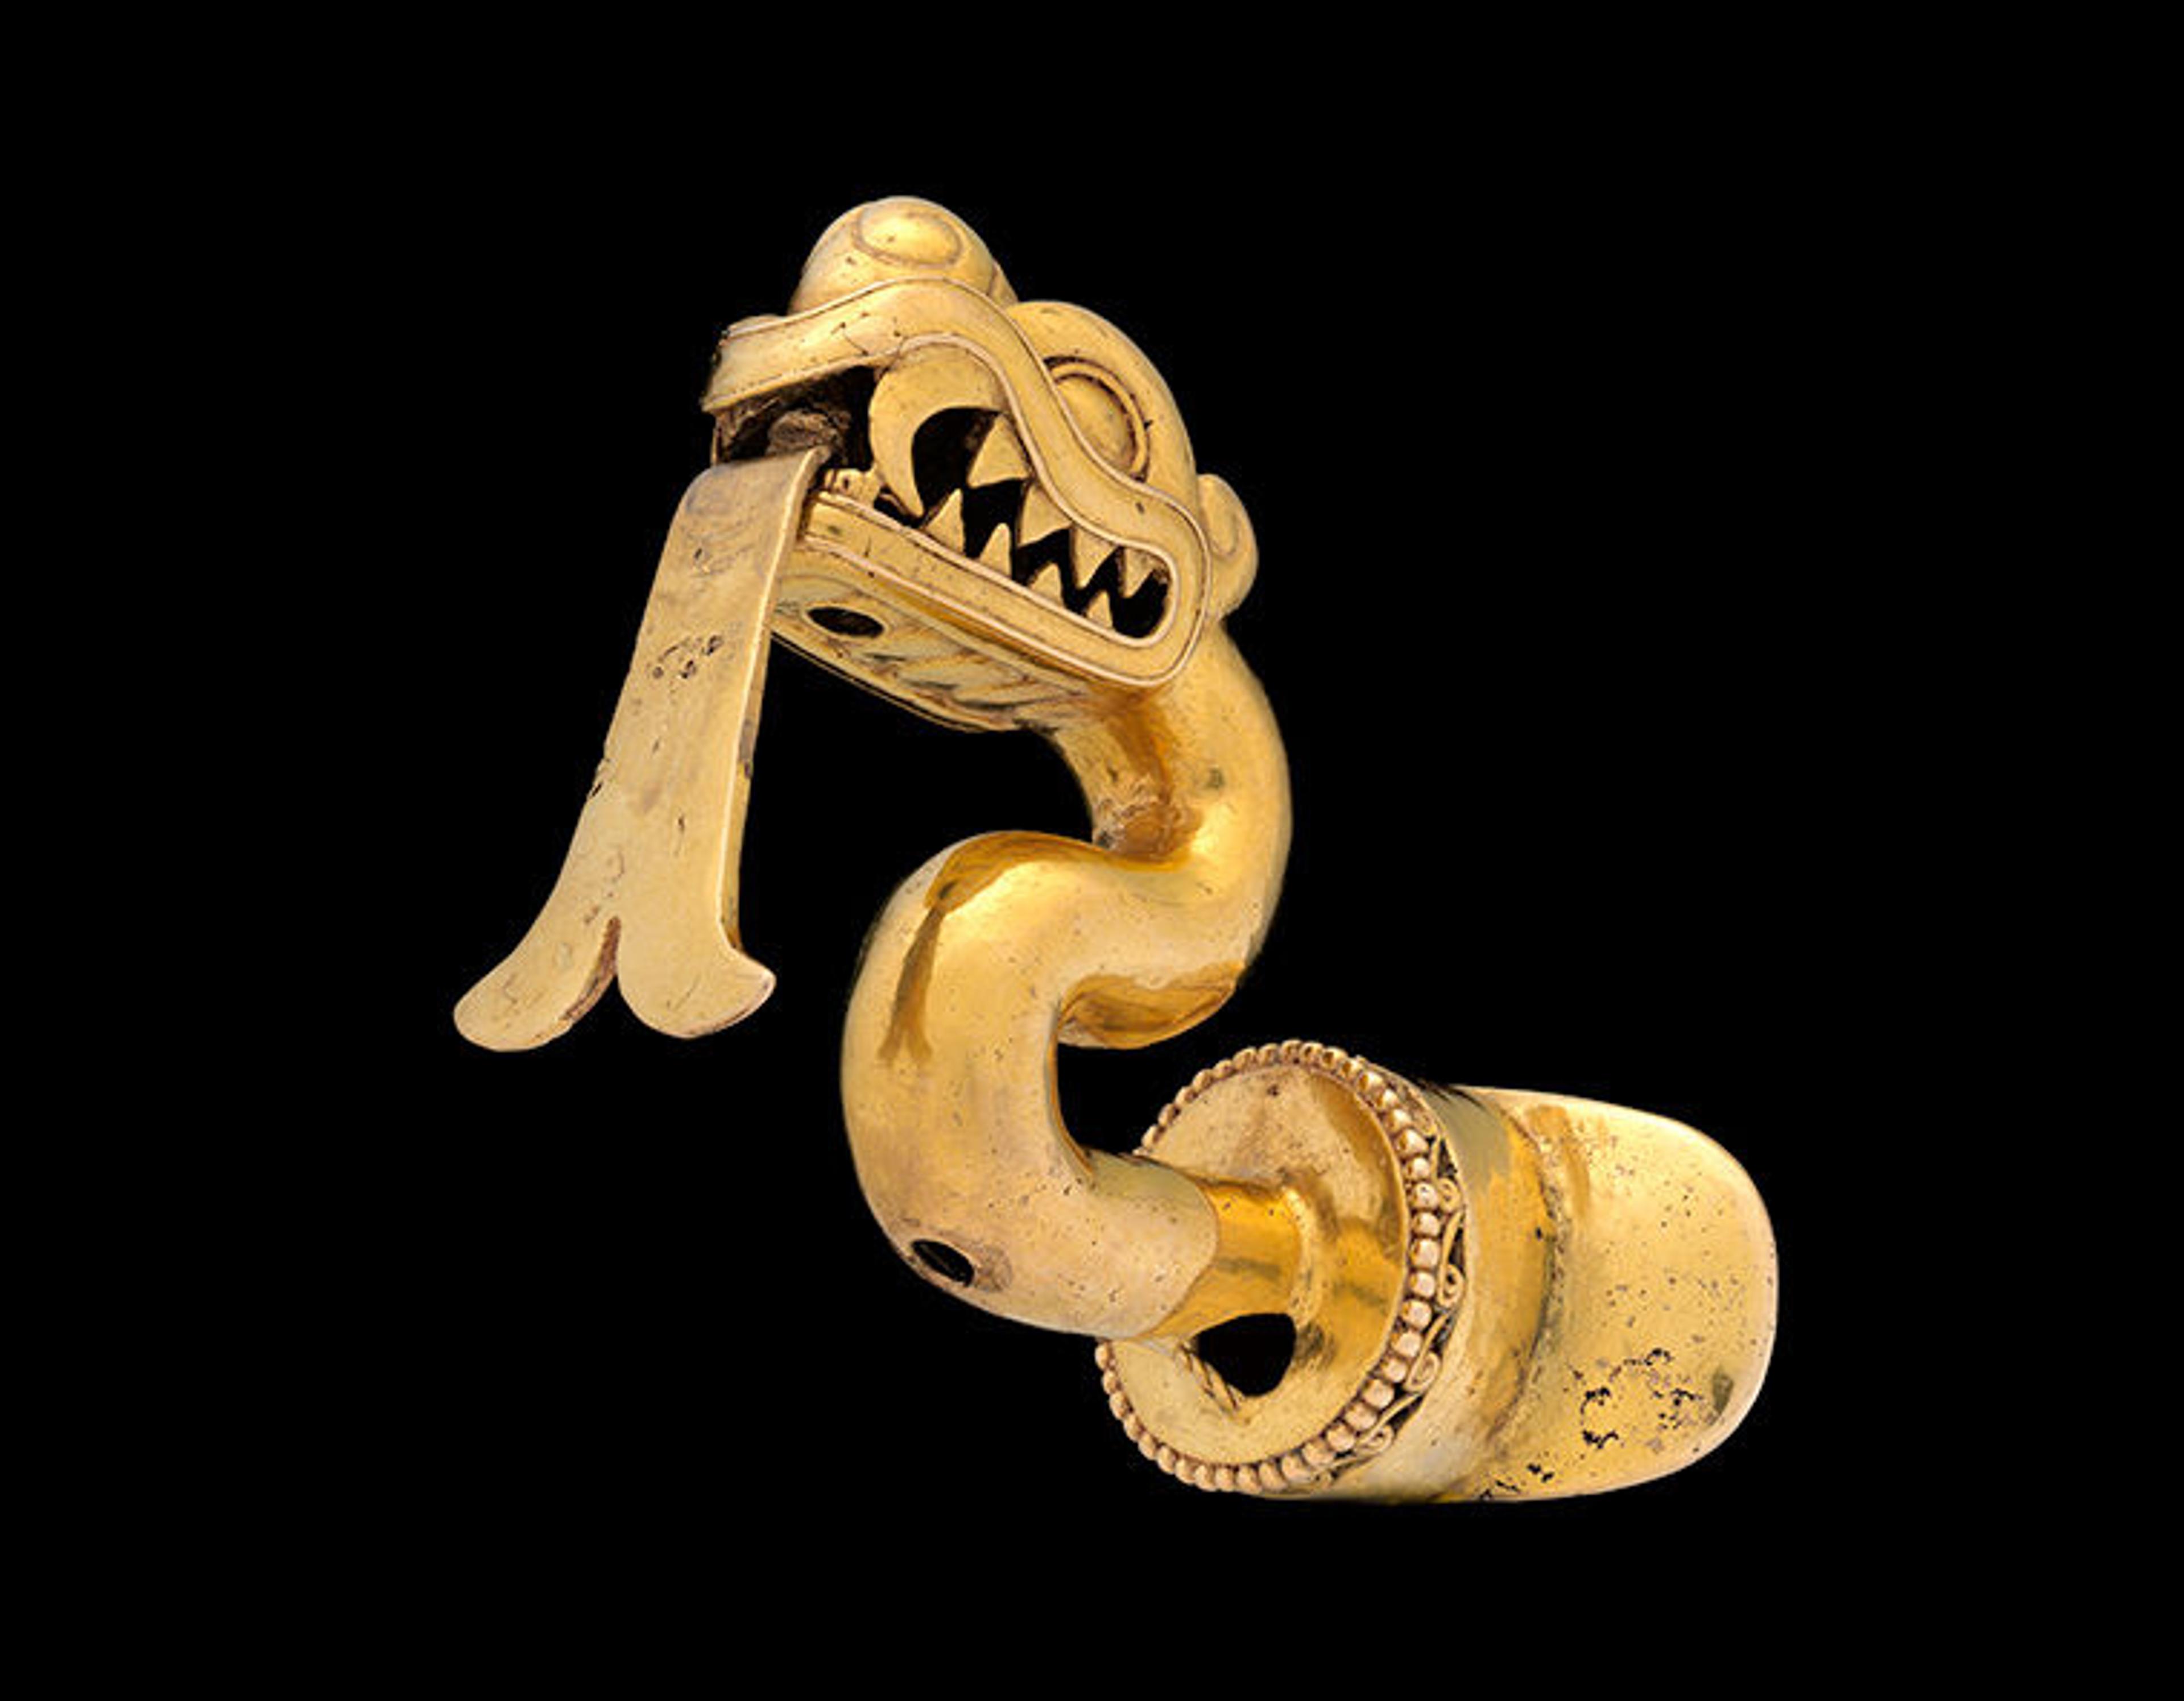 A lip ornament in the shape of a snake-like creature. 